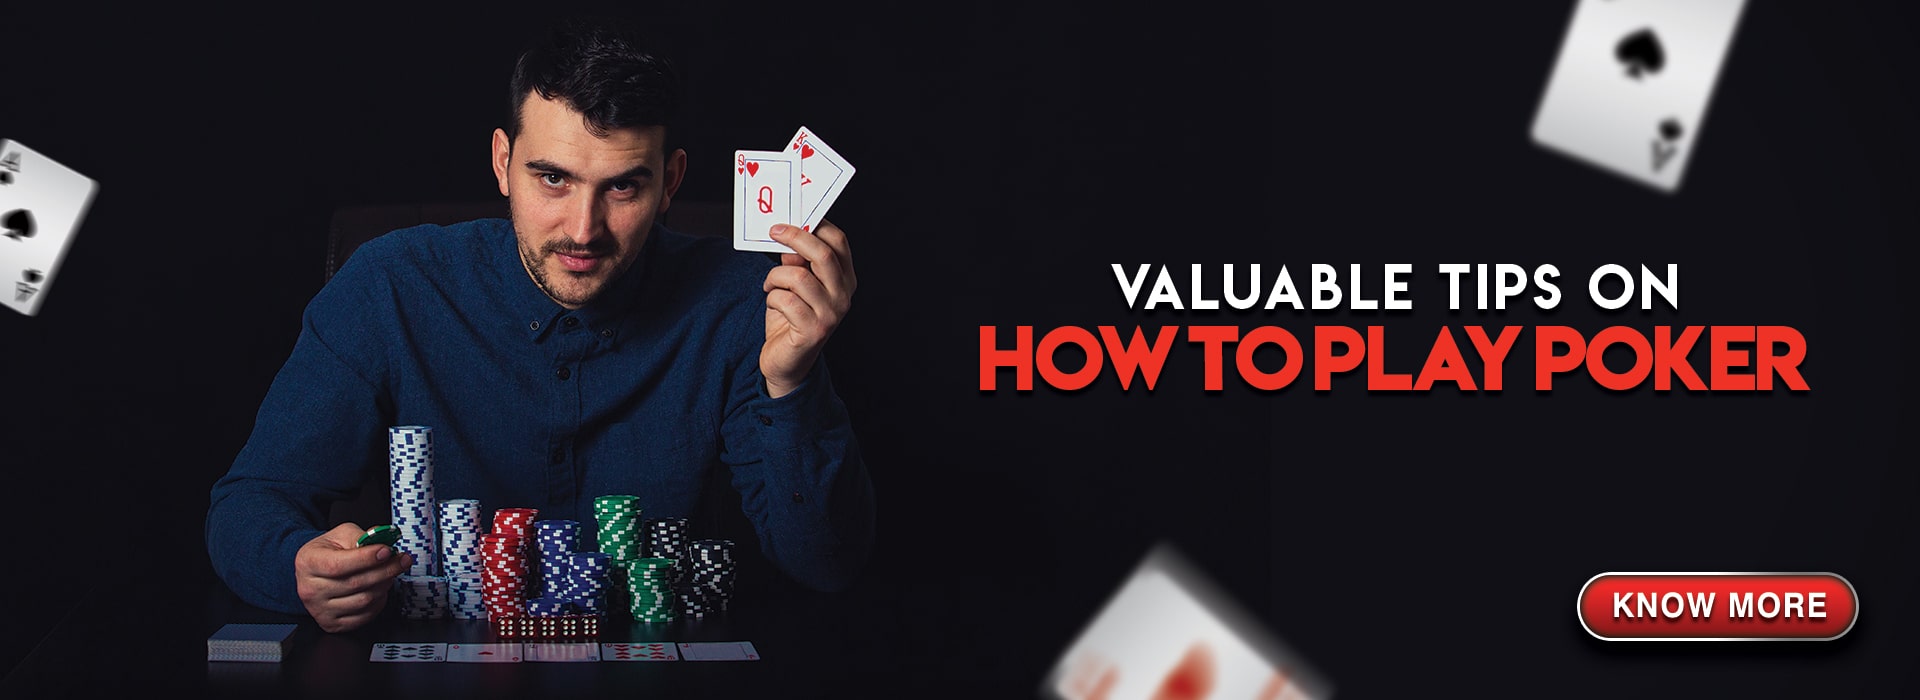 Valuable tips for online poker players